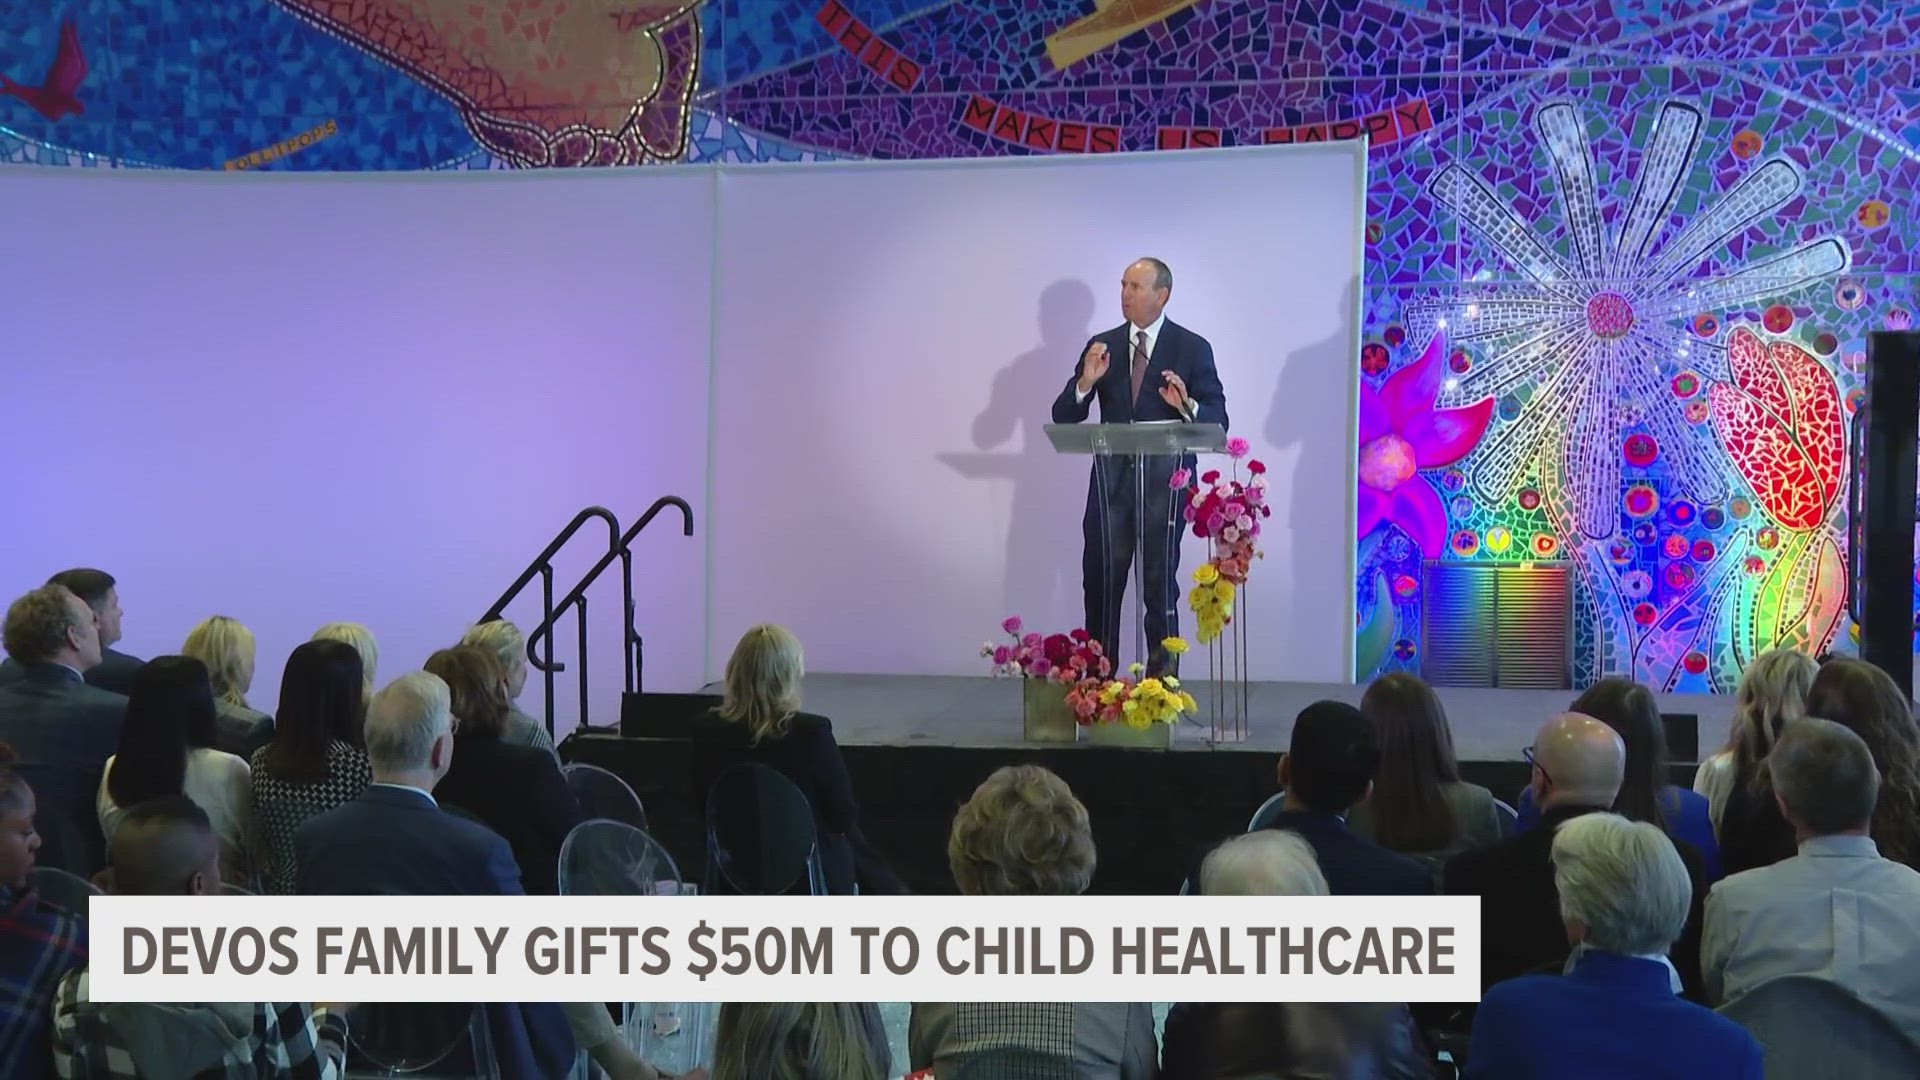 The funding will expand services at the Helen DeVos Children's Hospital and help build two new pediatric health care centers in West Michigan.